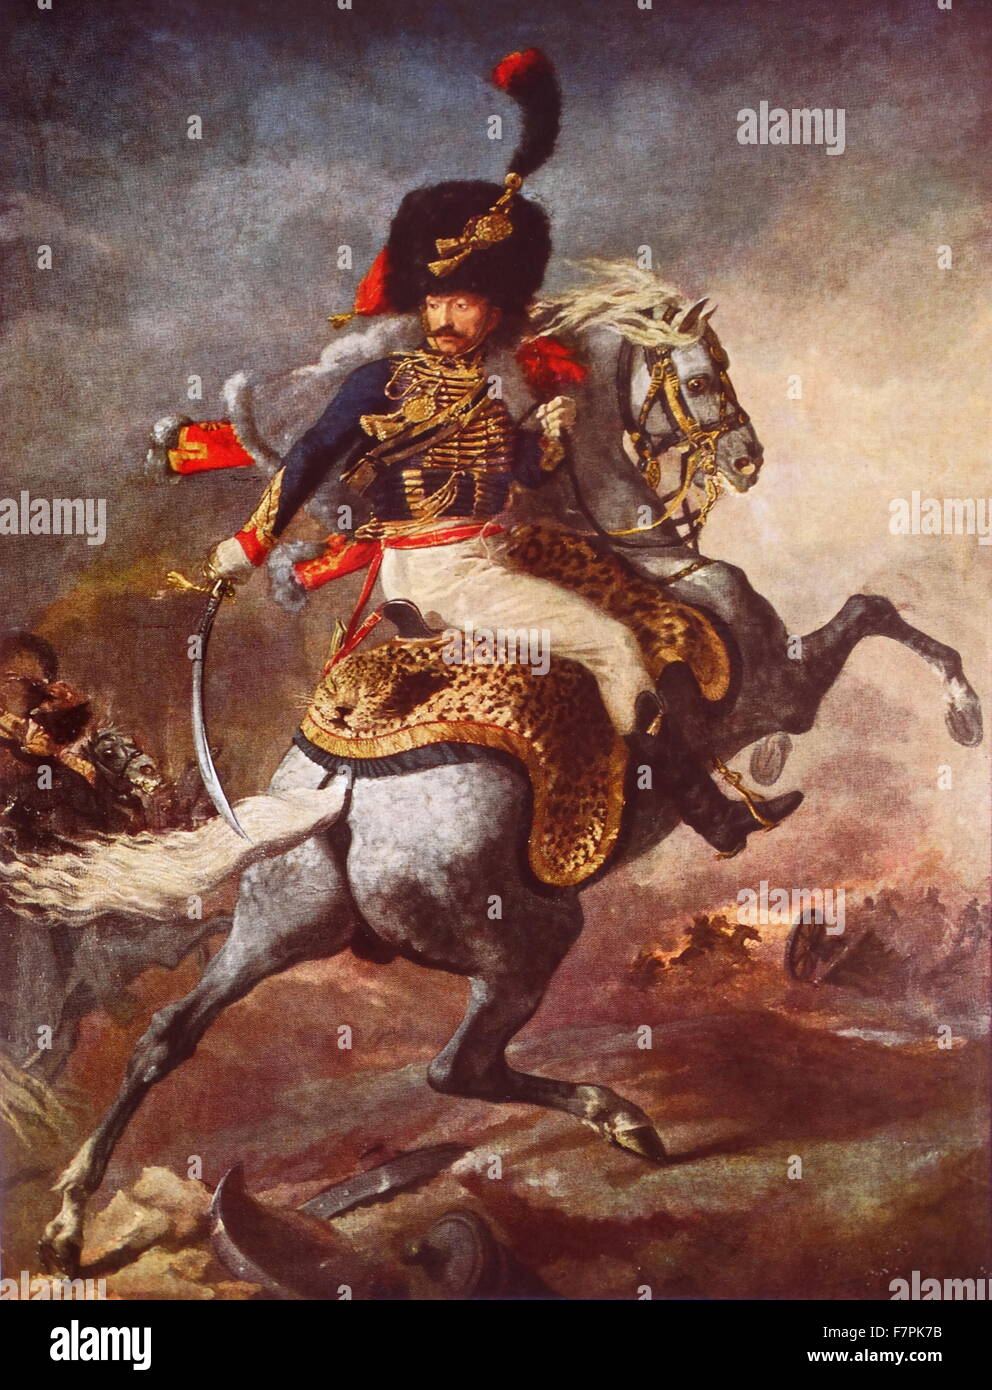 Painting titled 'Mounted Officer of the Guard' by Théodore Géricault (1791-1824) French painter and lithographer. Dated 1812 Stock Photo